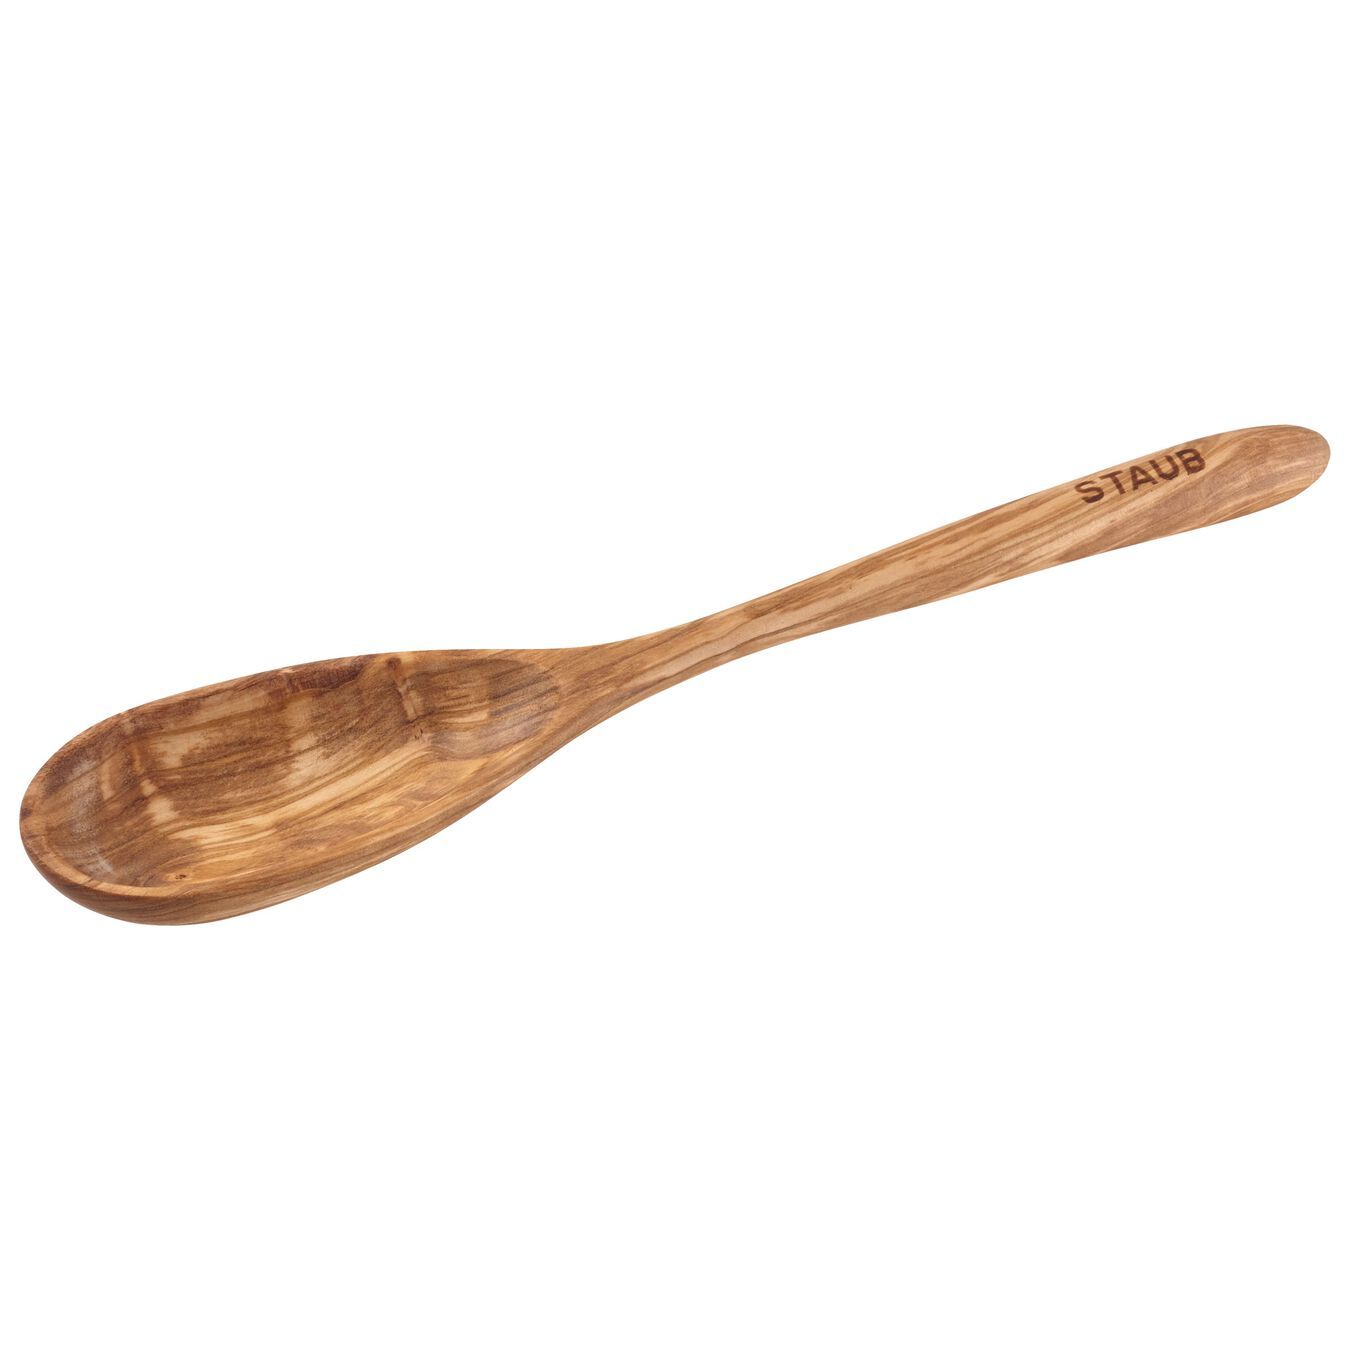 12.25 inch, Fiber wood, Cooking spoon, brown | The ZWILLING Group Cutlery & Cookware